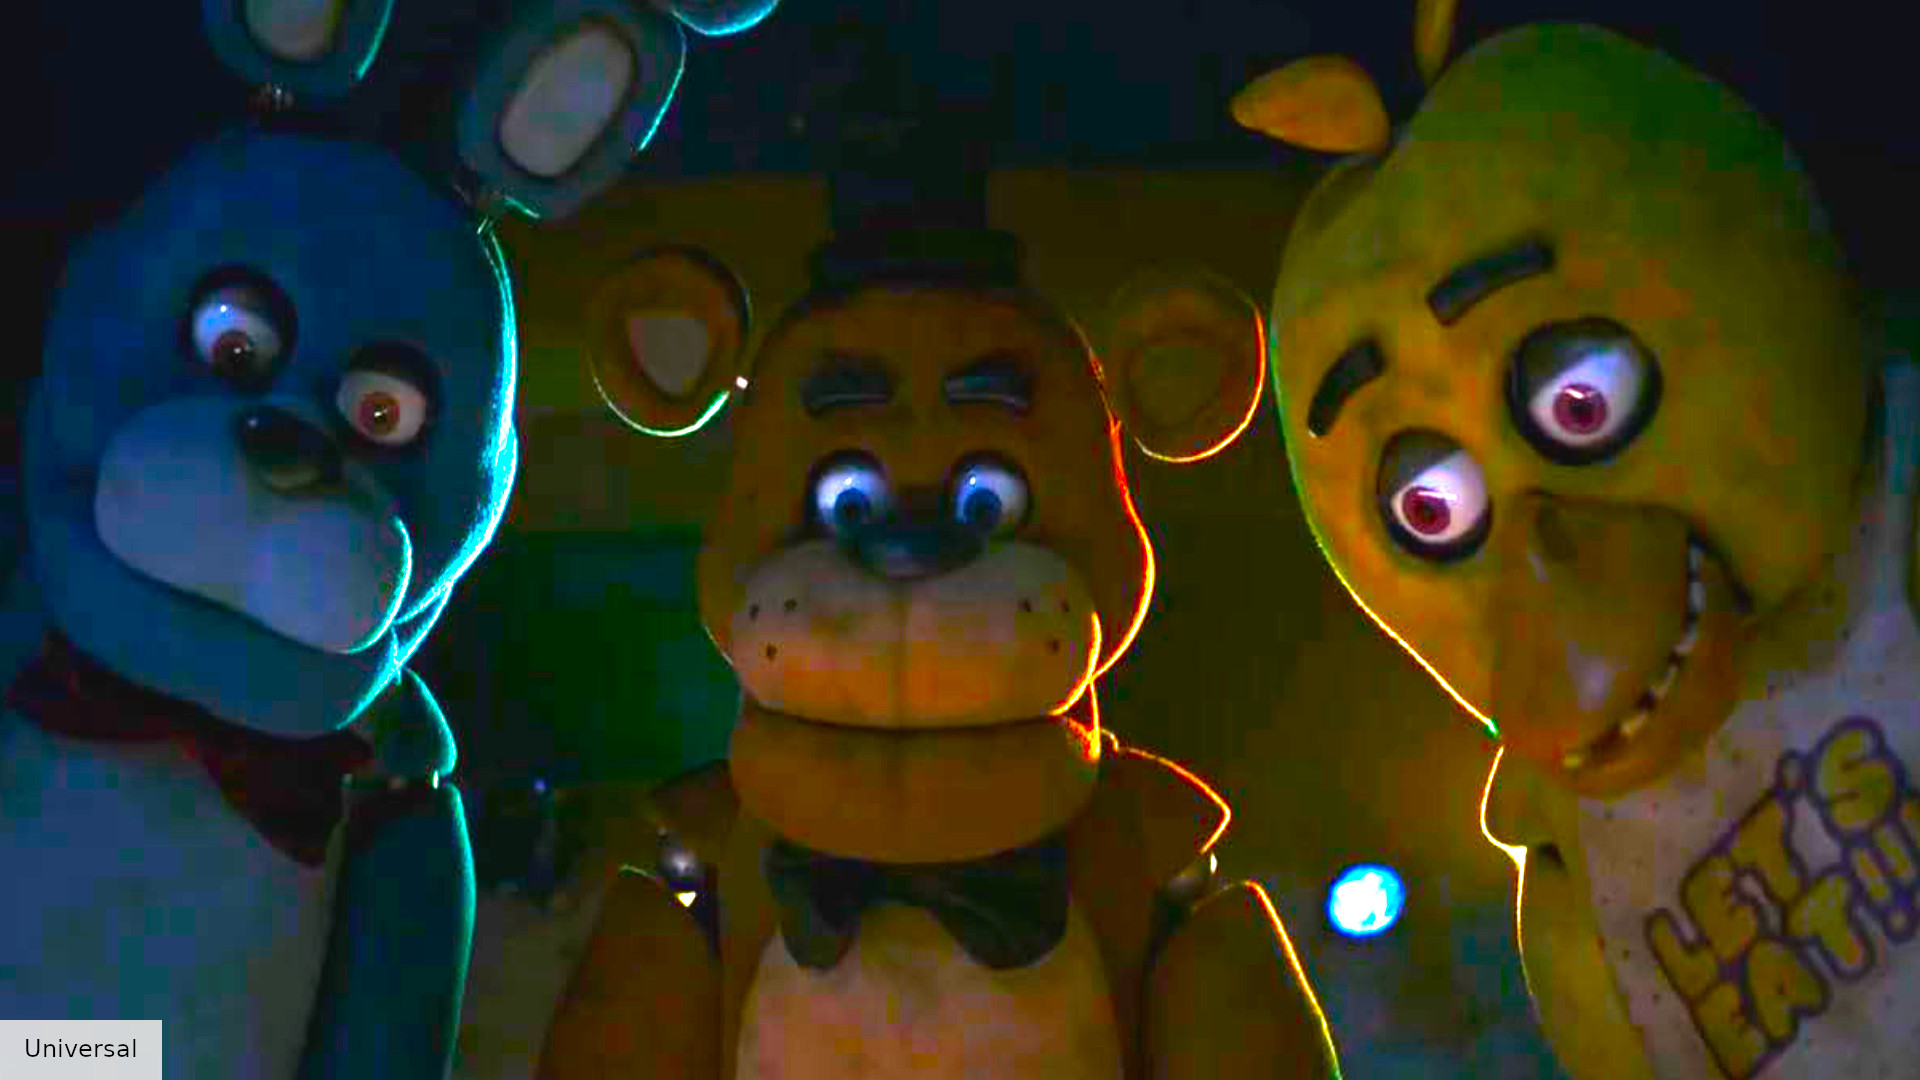 Five Nights at Freddy's Review